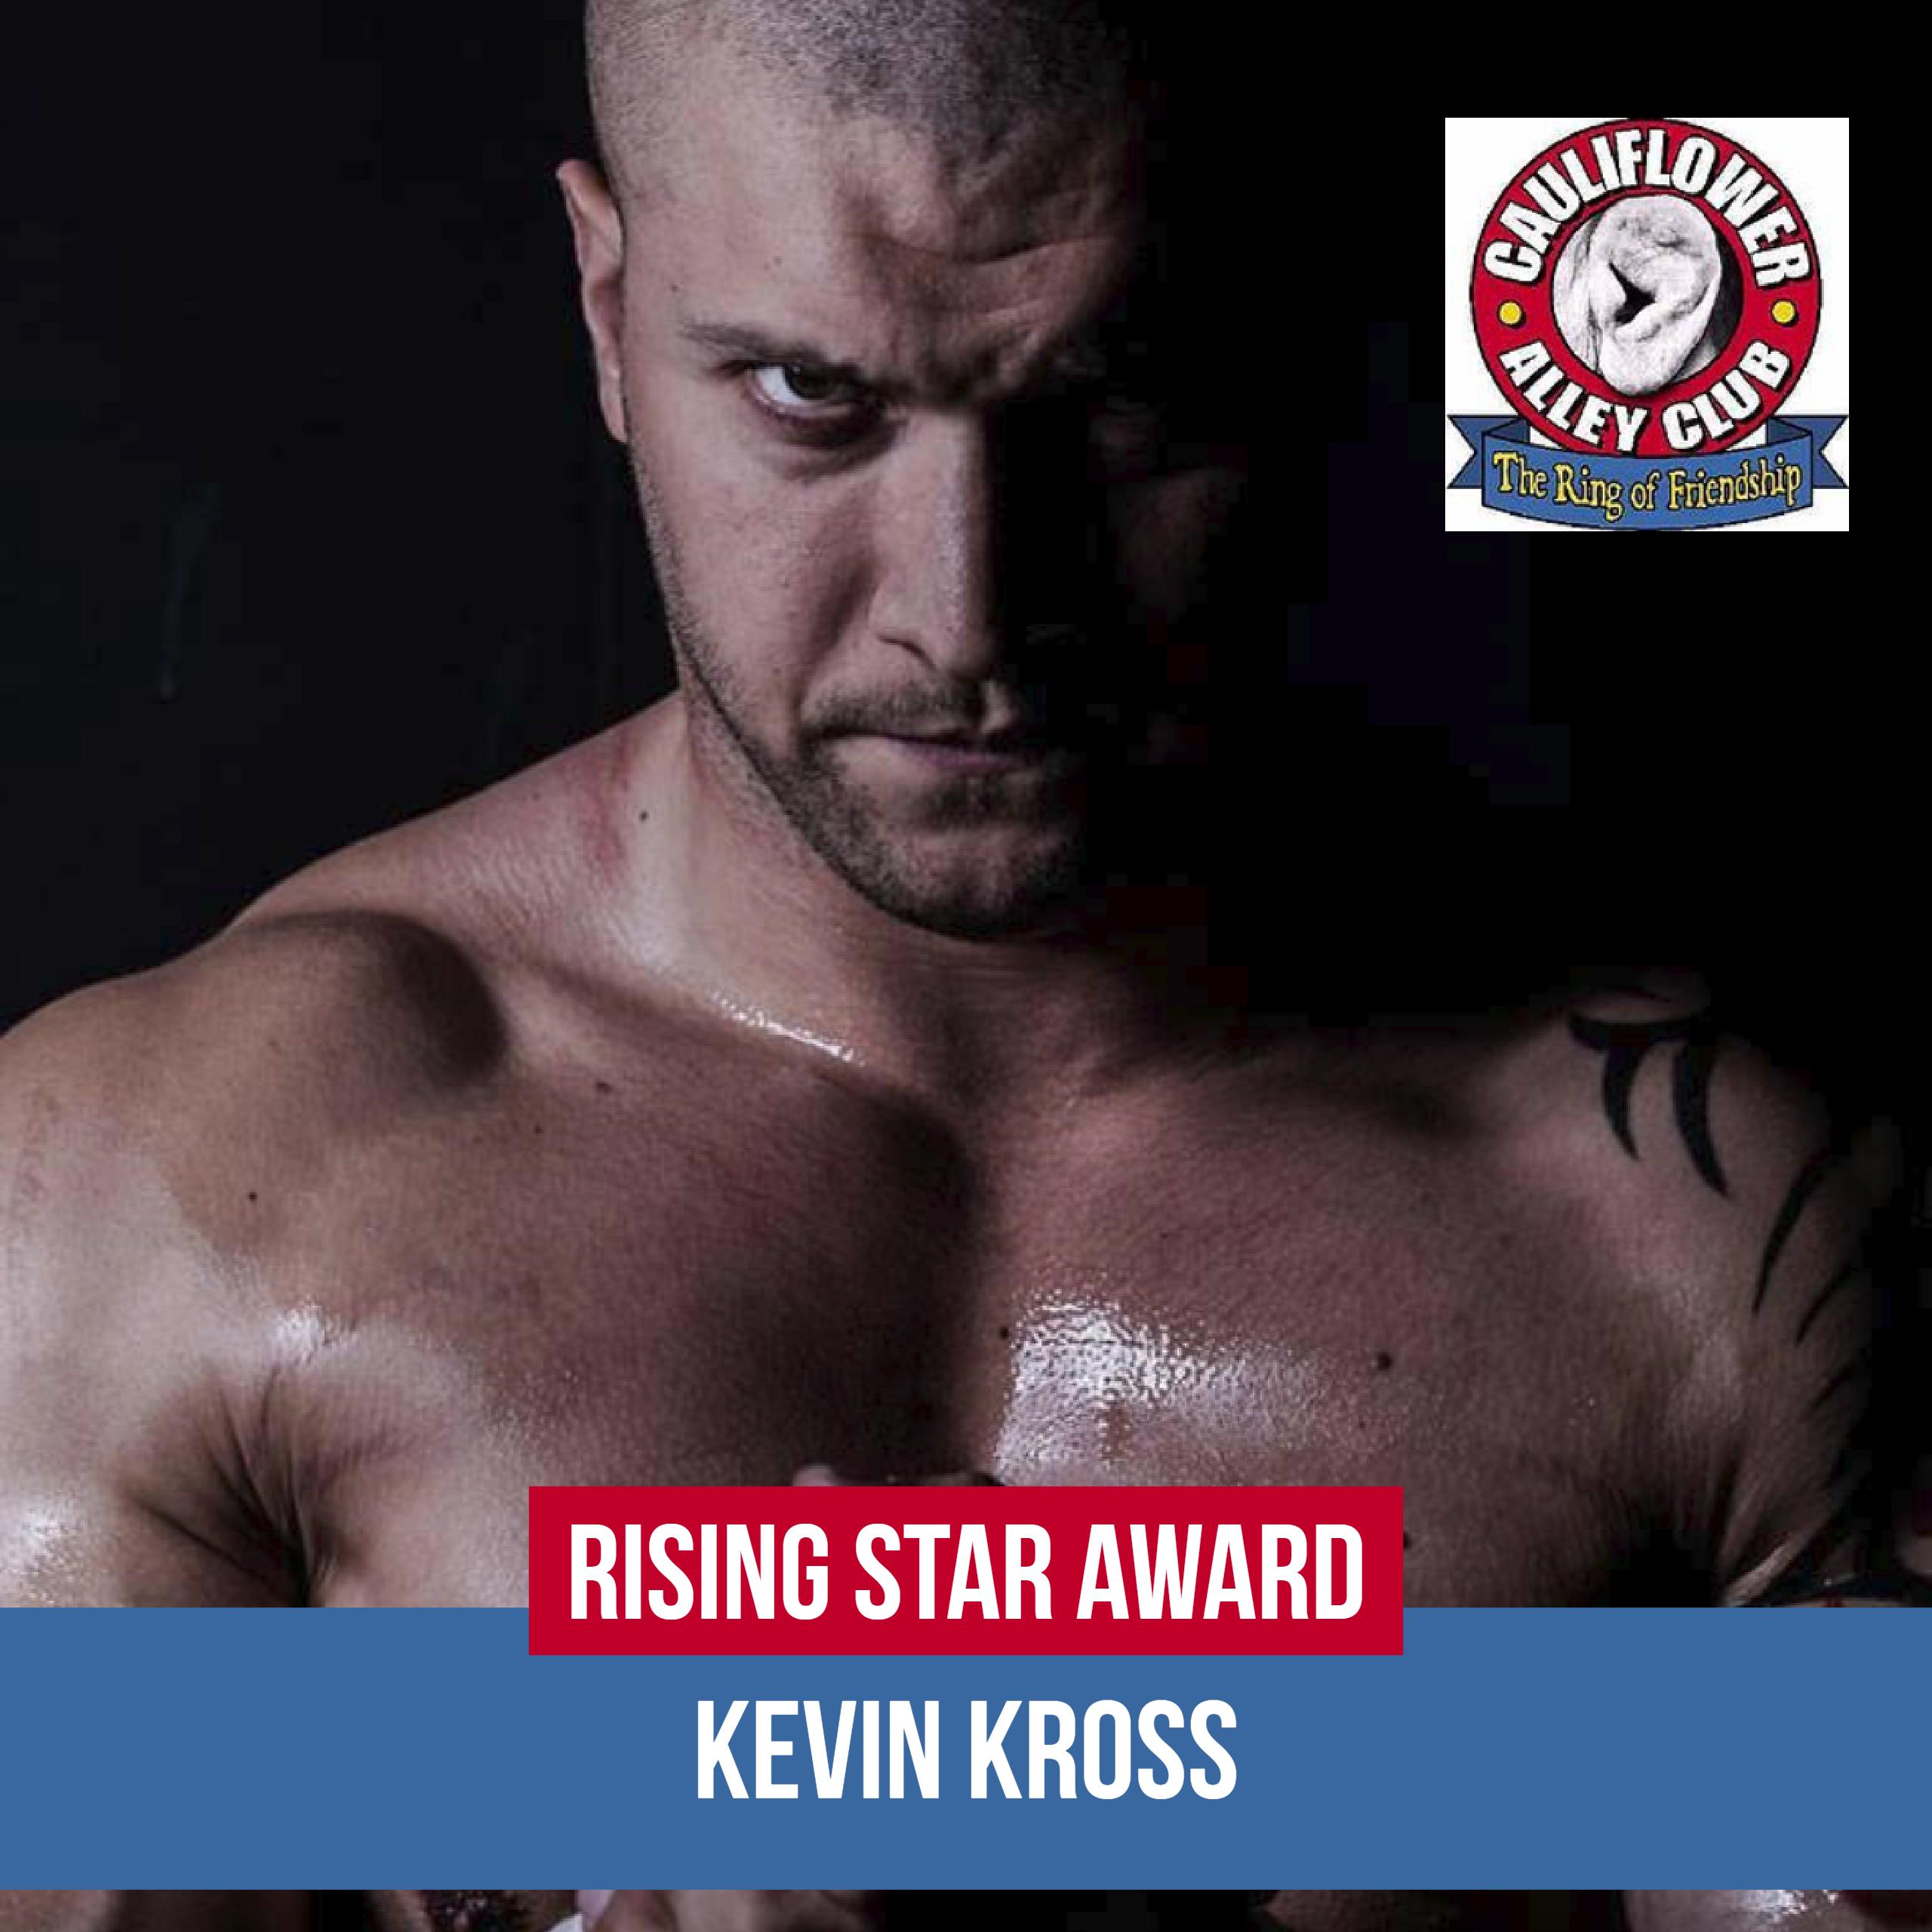 Kevin Kross to Receive the 2018 Rising Star Award